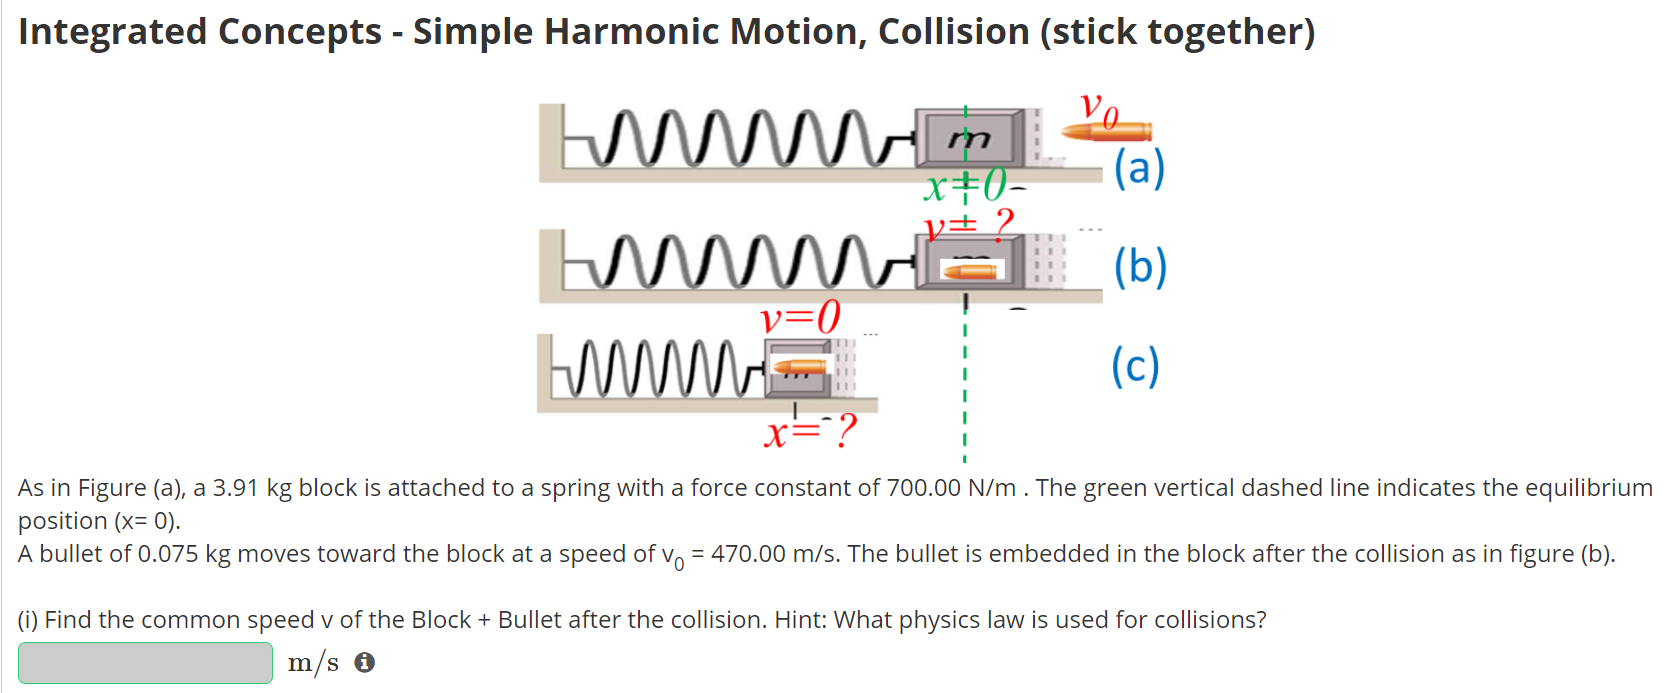 Integrated Concepts - Simple Harmonic Motion, Collision (stick together) As in Figure (a), a 3.91 kg block is attached to a spring with a force constant of 700.00 N/m. The green vertical dashed line indicates the equilibrium position (x = 0). A bullet of 0.075 kg moves toward the block at a speed of v0 = 470.00 m/s. The bullet is embedded in the block after the collision as in figure (b). (i) Find the common speed v of the Block + Bullet after the collision. Hint: What physics law is used for collisions? m/s (ii) The Block+Bullet moves on a frictionless horizontal surface and compresses the spring. What is the x in Figure (c) when the Block+Bullet reaches a momentary rest? Report x as NEGATIVE. m (iii) How much time does it take the Block+Bullet to move from figure (b) to figure (c)? (iv) What is the speed of the Block+Bullet when it reaches x2 = −0.46 m? m/s